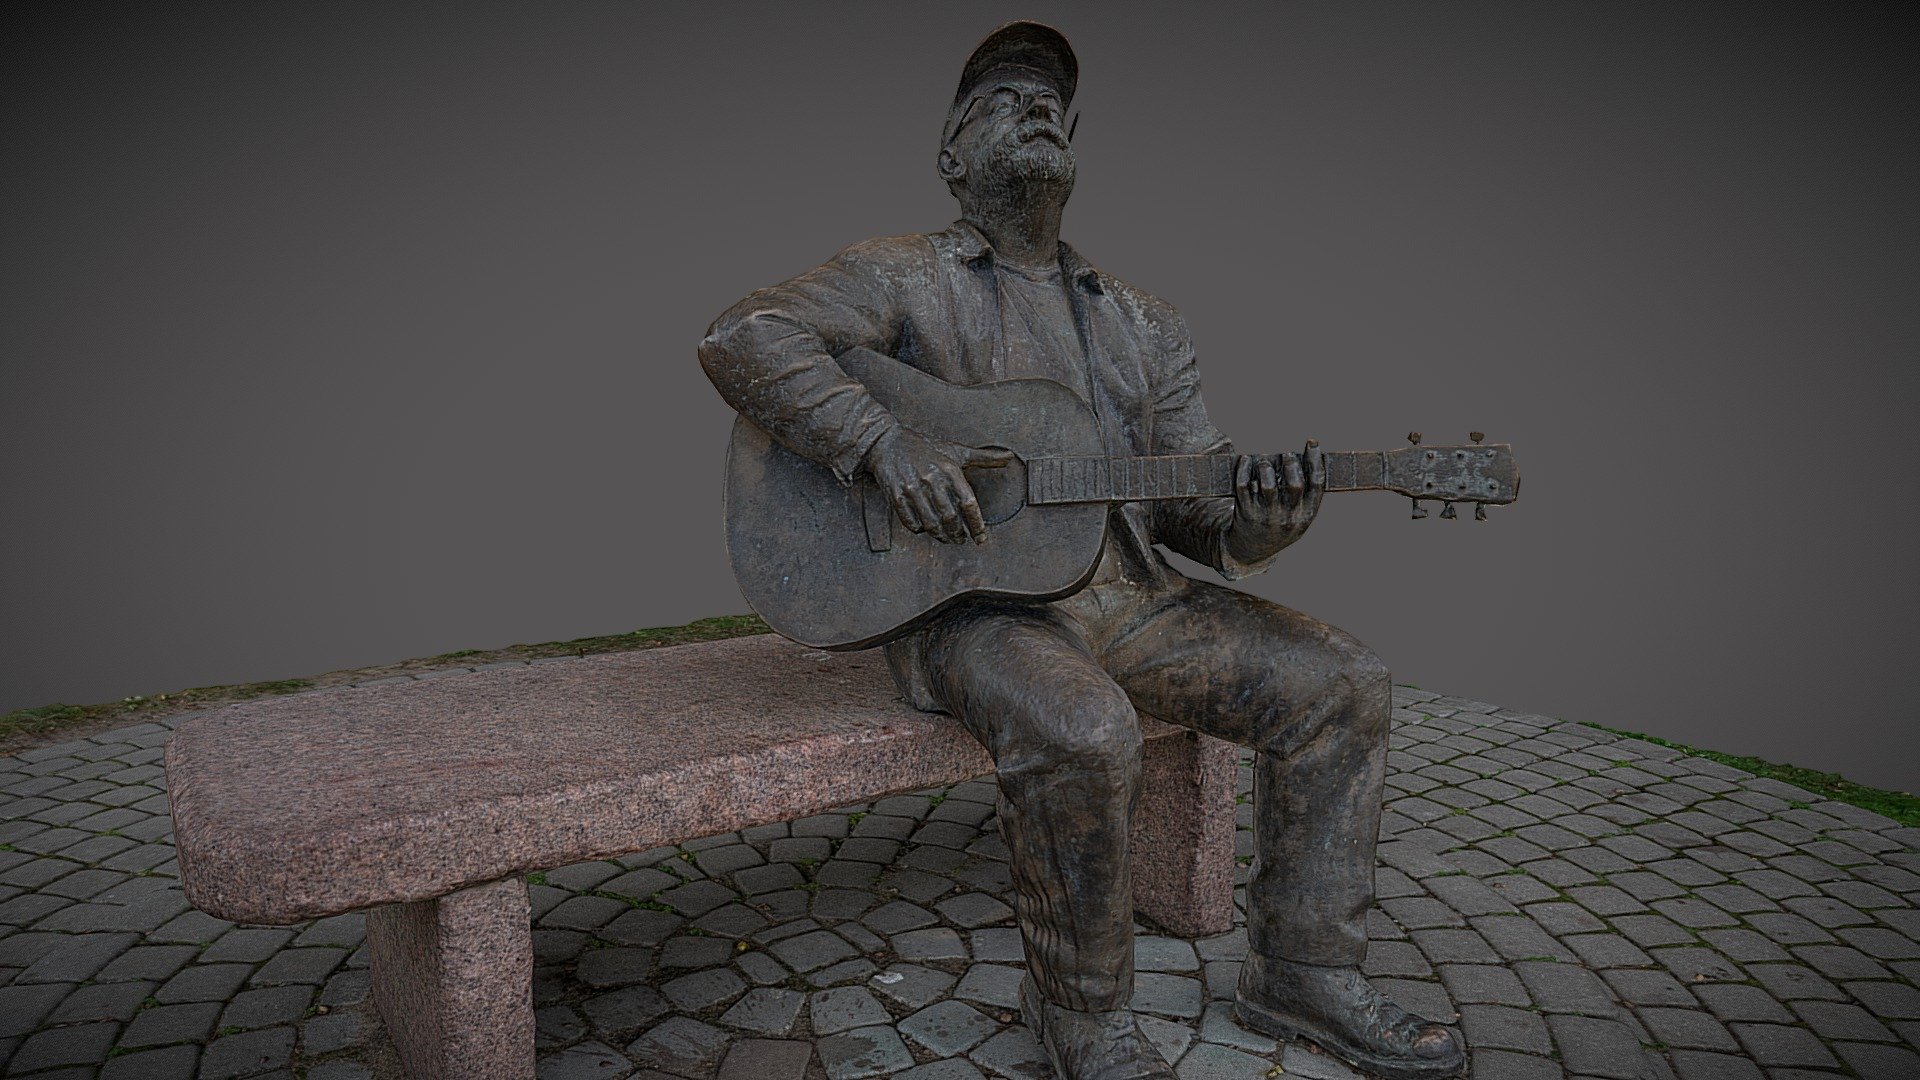 Vytautas Kernagis (May 19, 1951 – March 15, 2008) was a Lithuanian singer-songwriter, bard, actor, director, and television announcer. He is considered a pioneer of Lithuanian sung poetry. 

Sculptor: Romas Kvintas
© Saulius Zaura www.dronepartner.lt 2021 - Vytautas Kernagis sculpture in Nida - 3D model by Saulius.Zaura 3d model